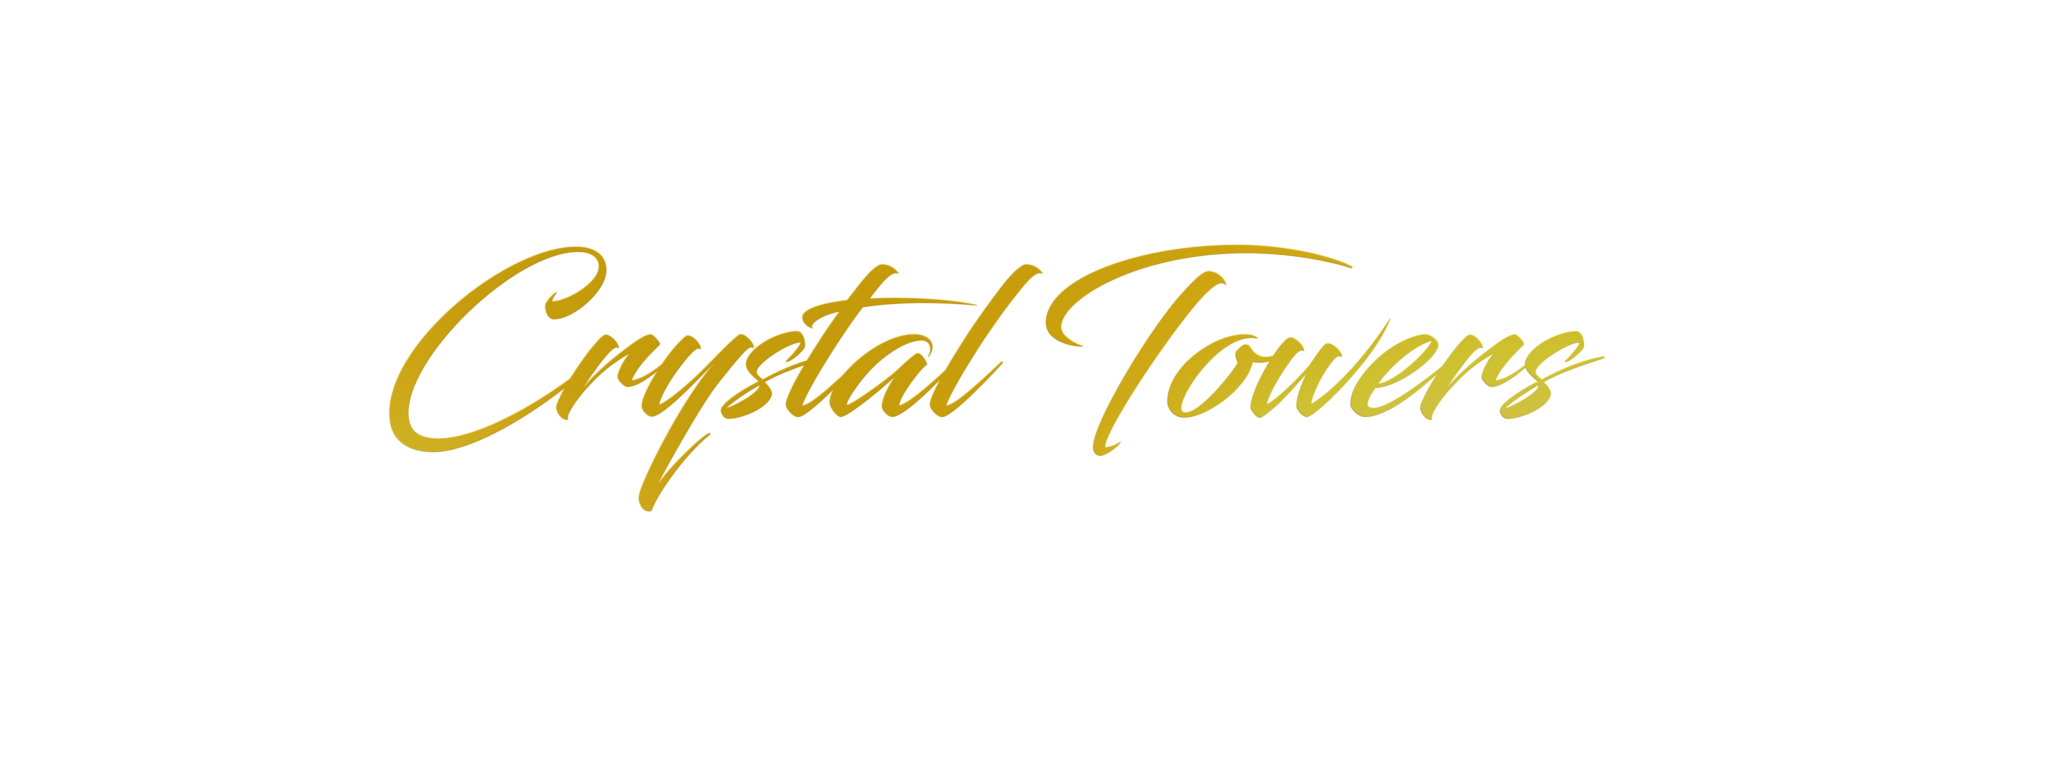 Gold Crystal Towers Lettering Group